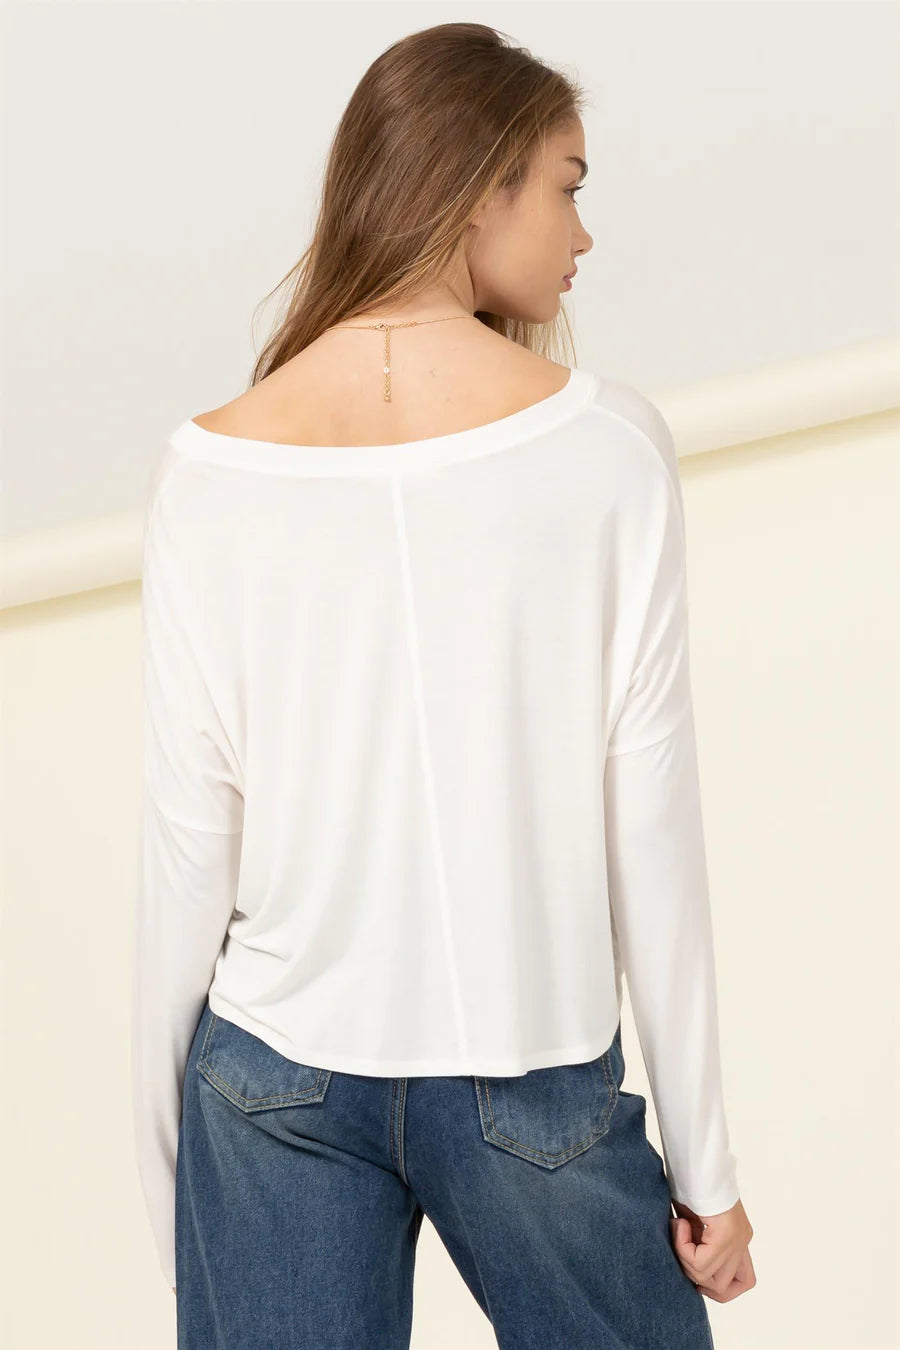 The back view of a woman wearing an Off White | Love Me Right V Neck Loose Fit Top by HYFVE.